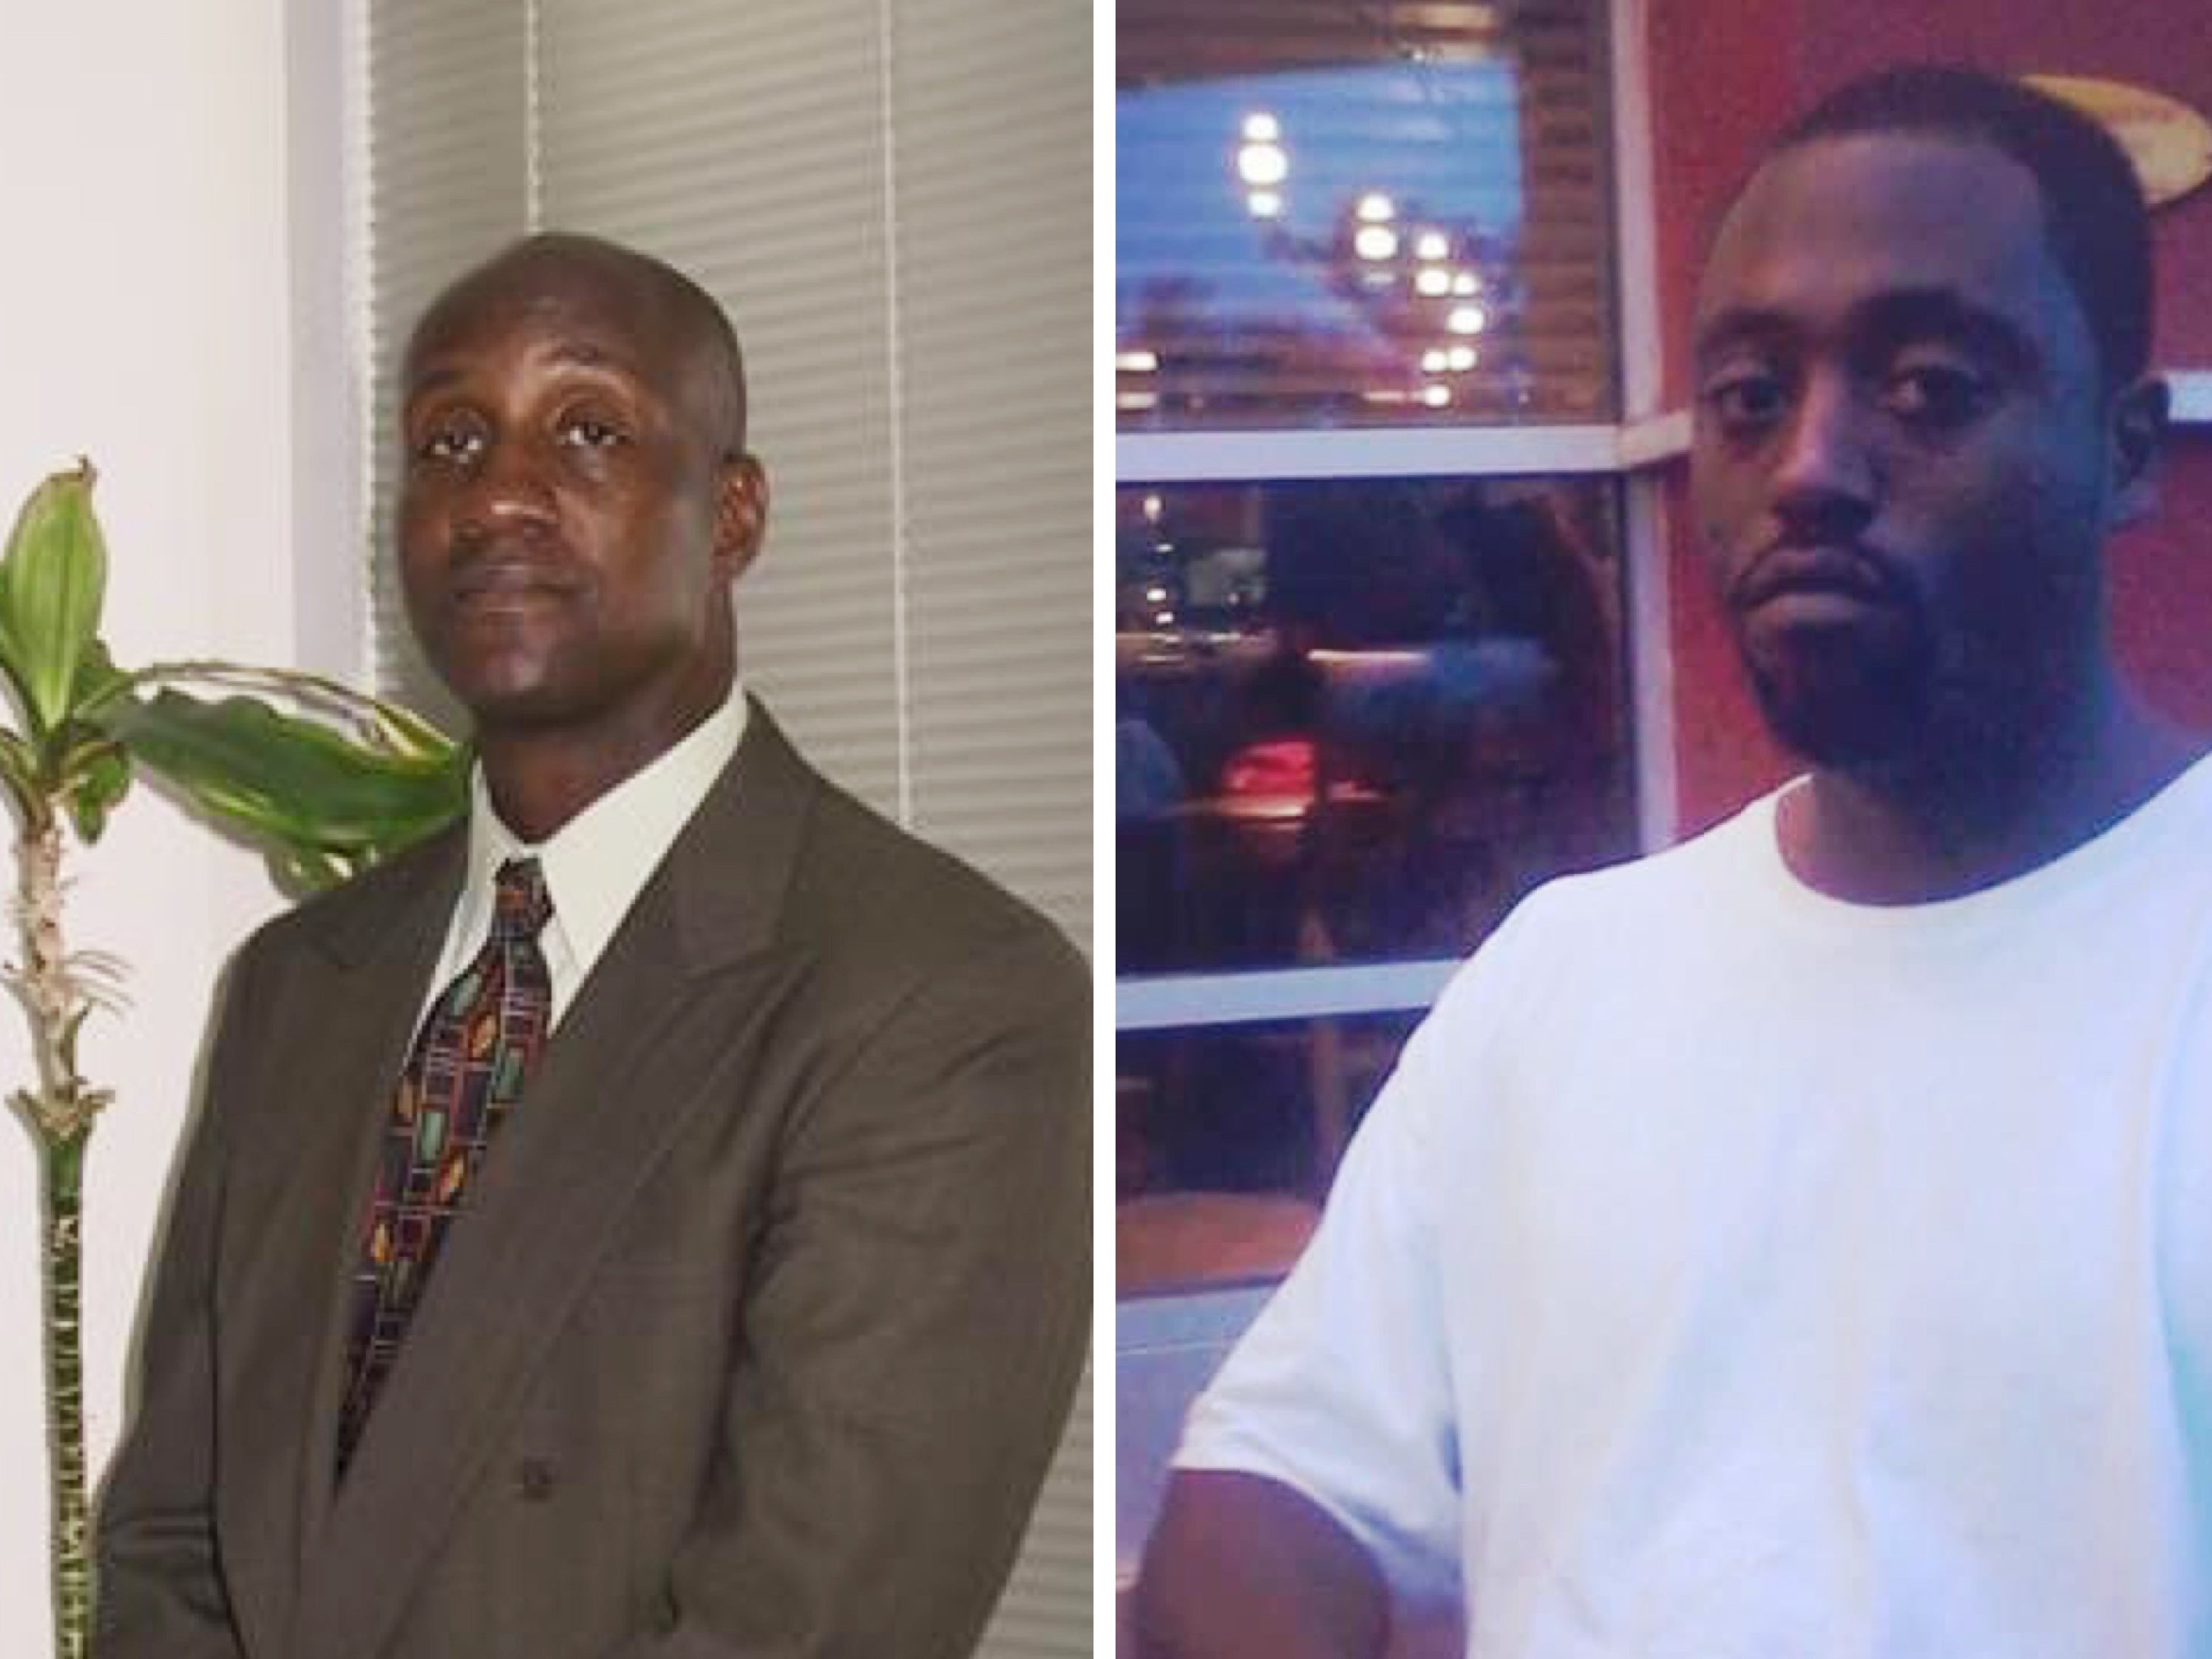 Nathaniel Picket Sr. (left) and his son, Nathaniel Pickett II (right), are pictured in side-by-side photos